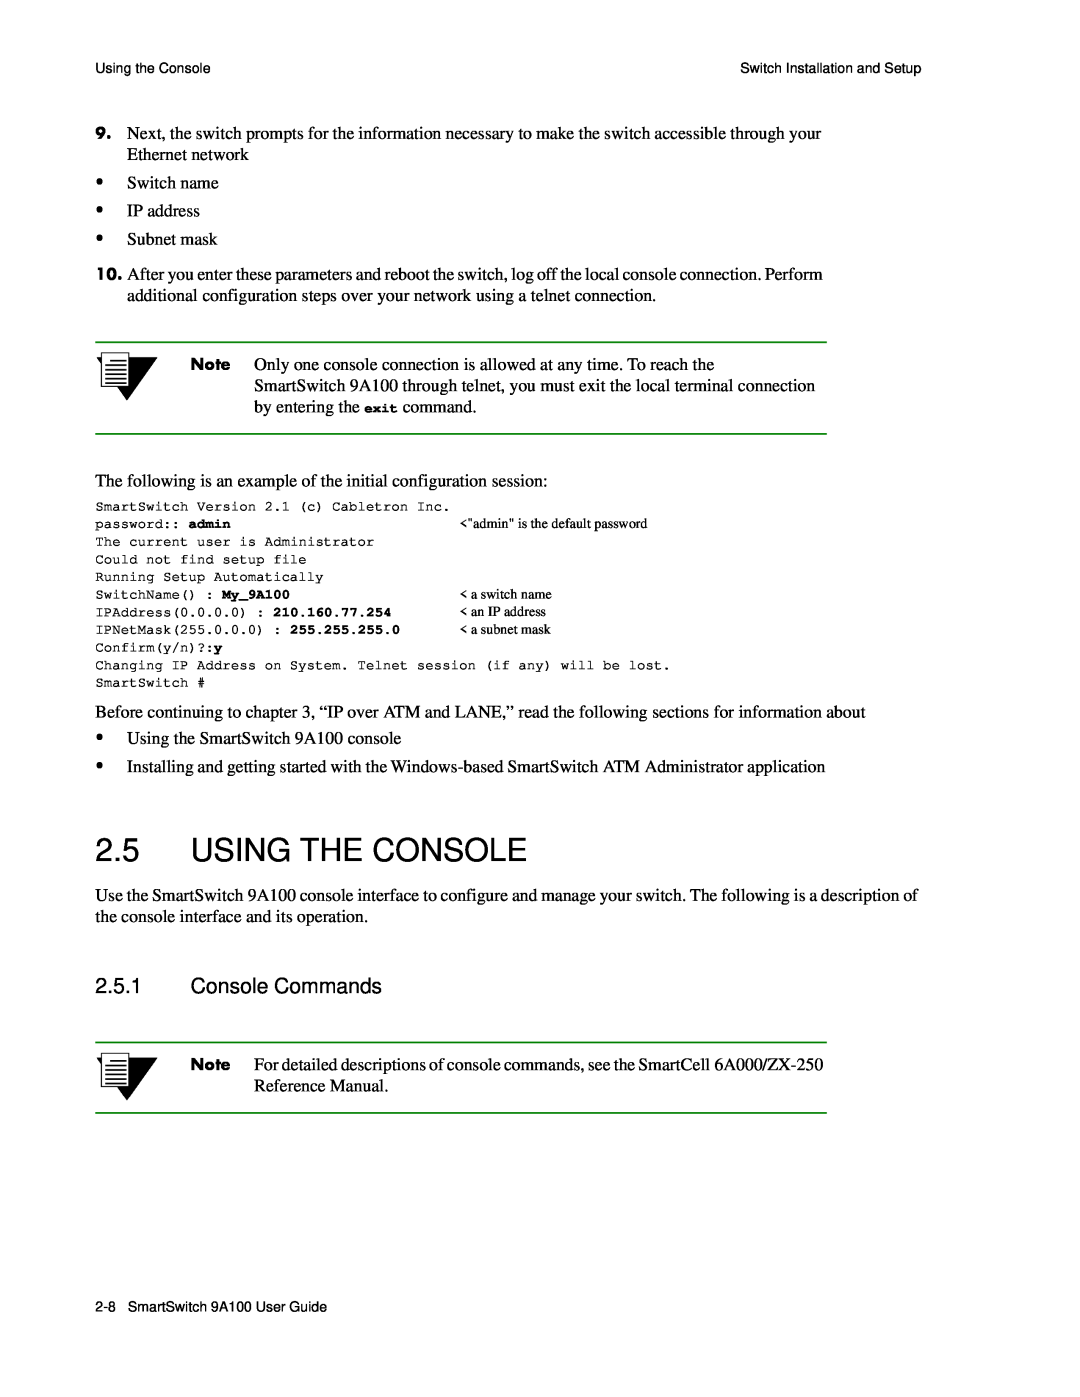 Cabletron Systems 9A100 manual Using The Console, Console Commands 